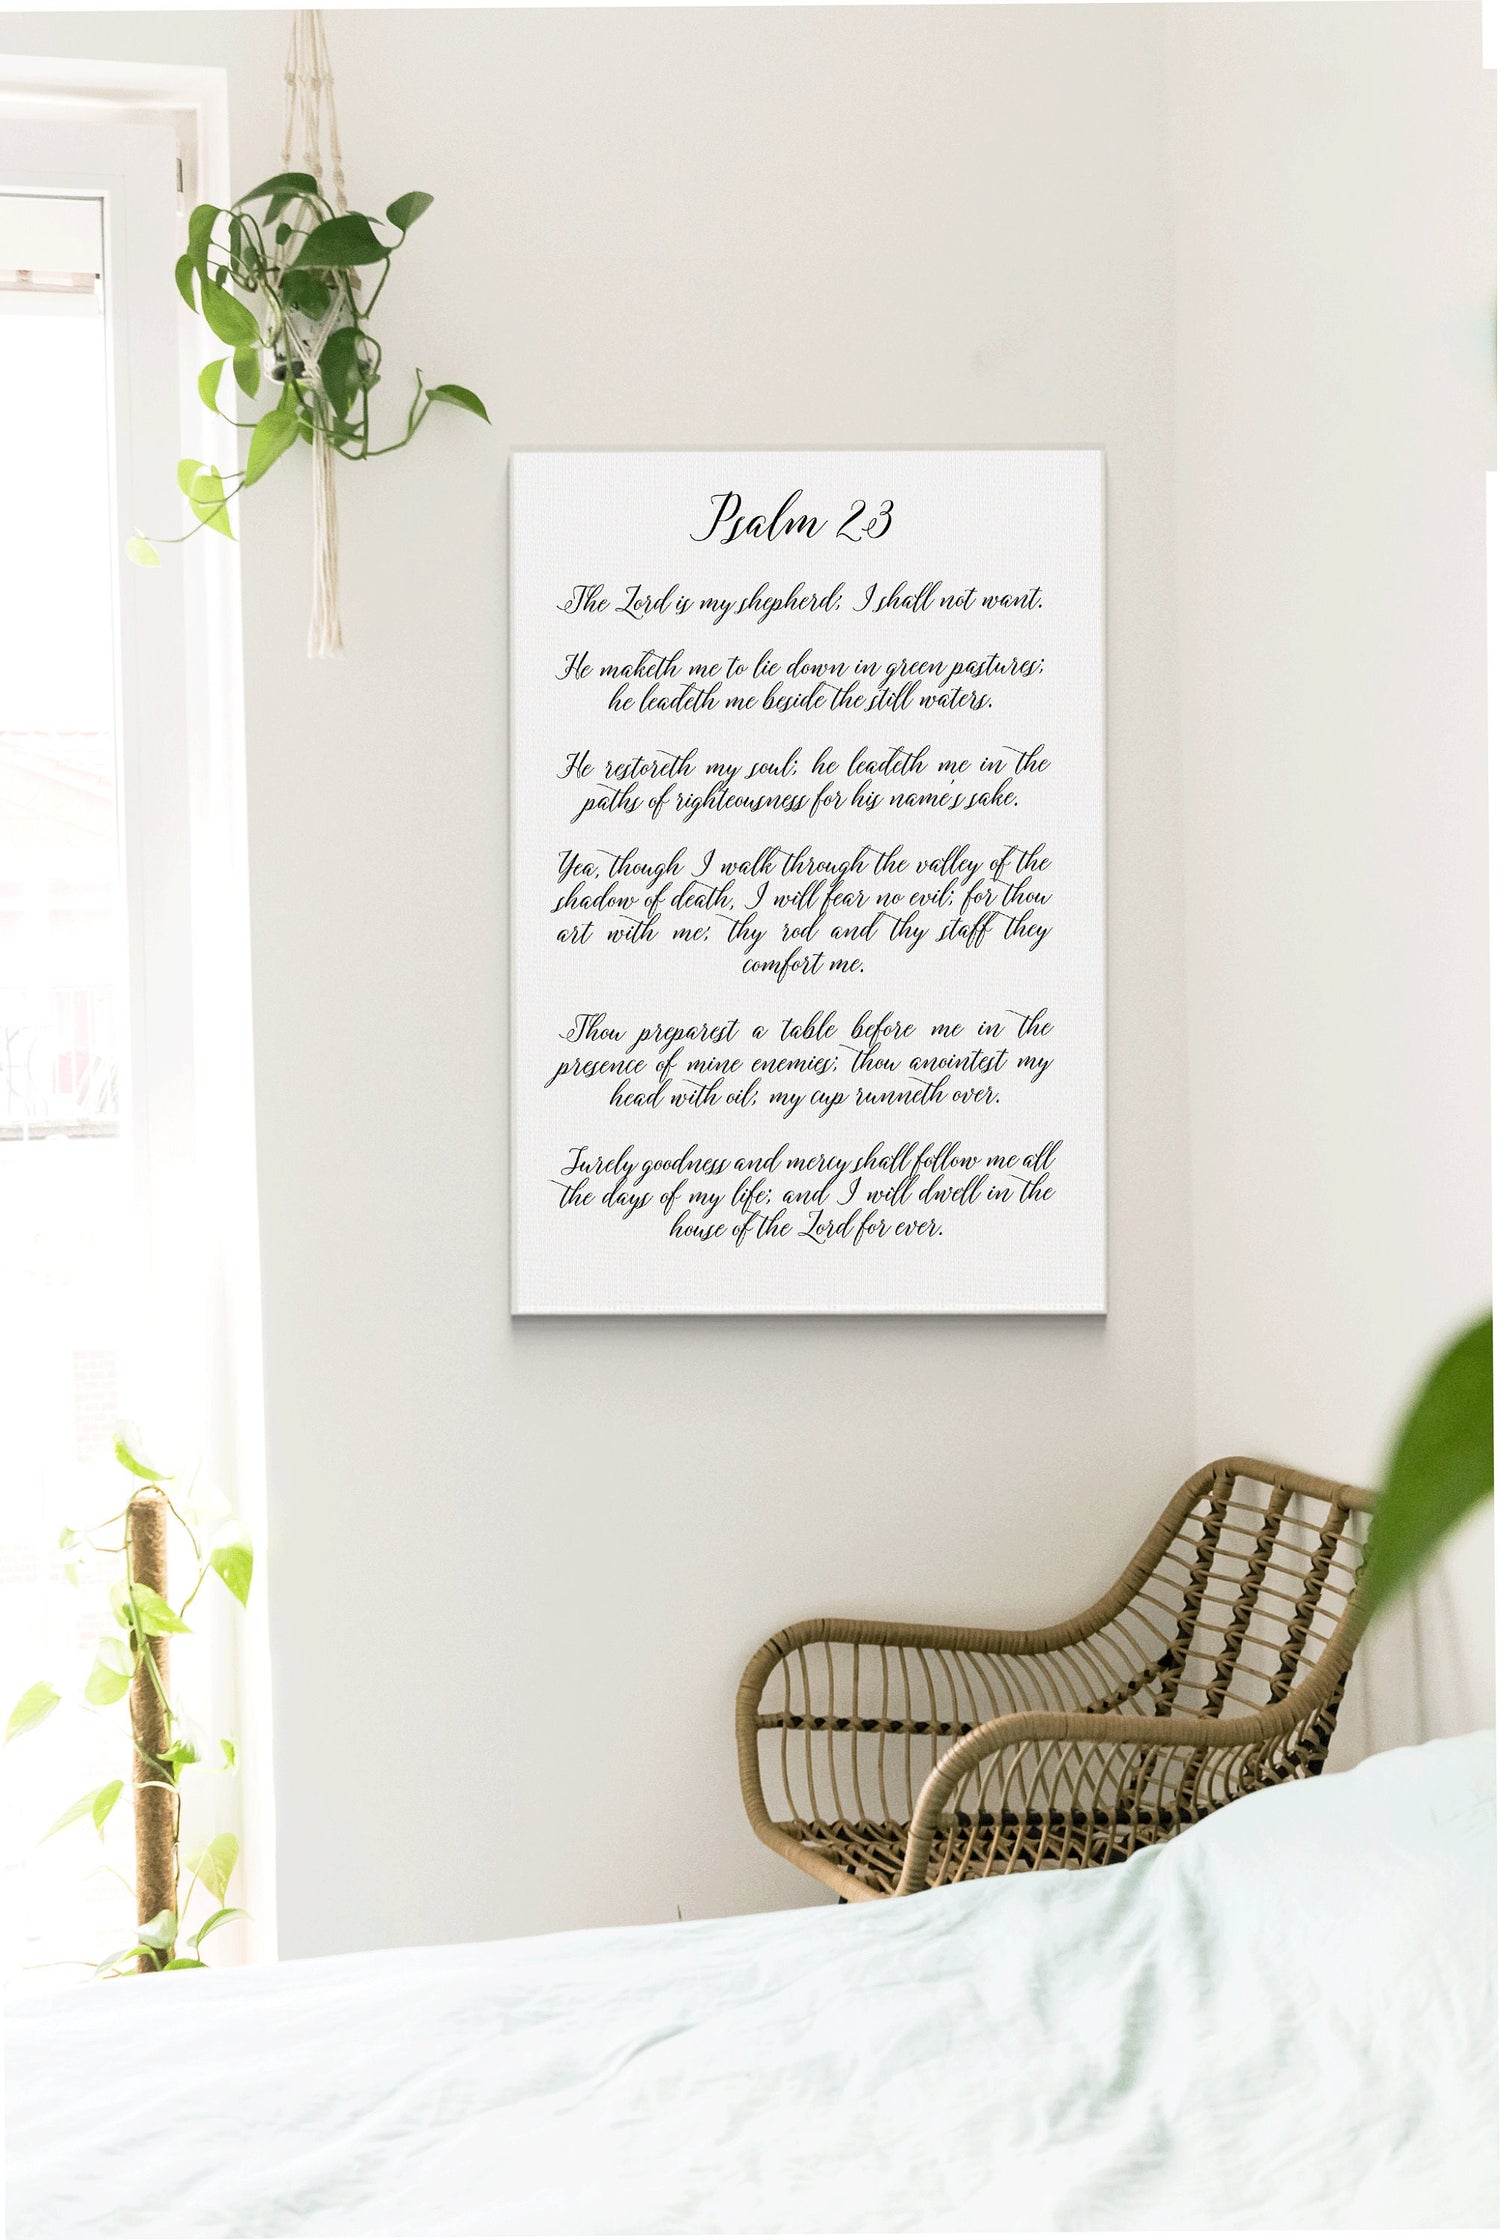 Psalm 23 Scripture Wall Art | Bible Verse Sign | Christian Wall Decor | Bible Verse Wall Art Sign | Psalm 91 Sign With Wood Frame Options